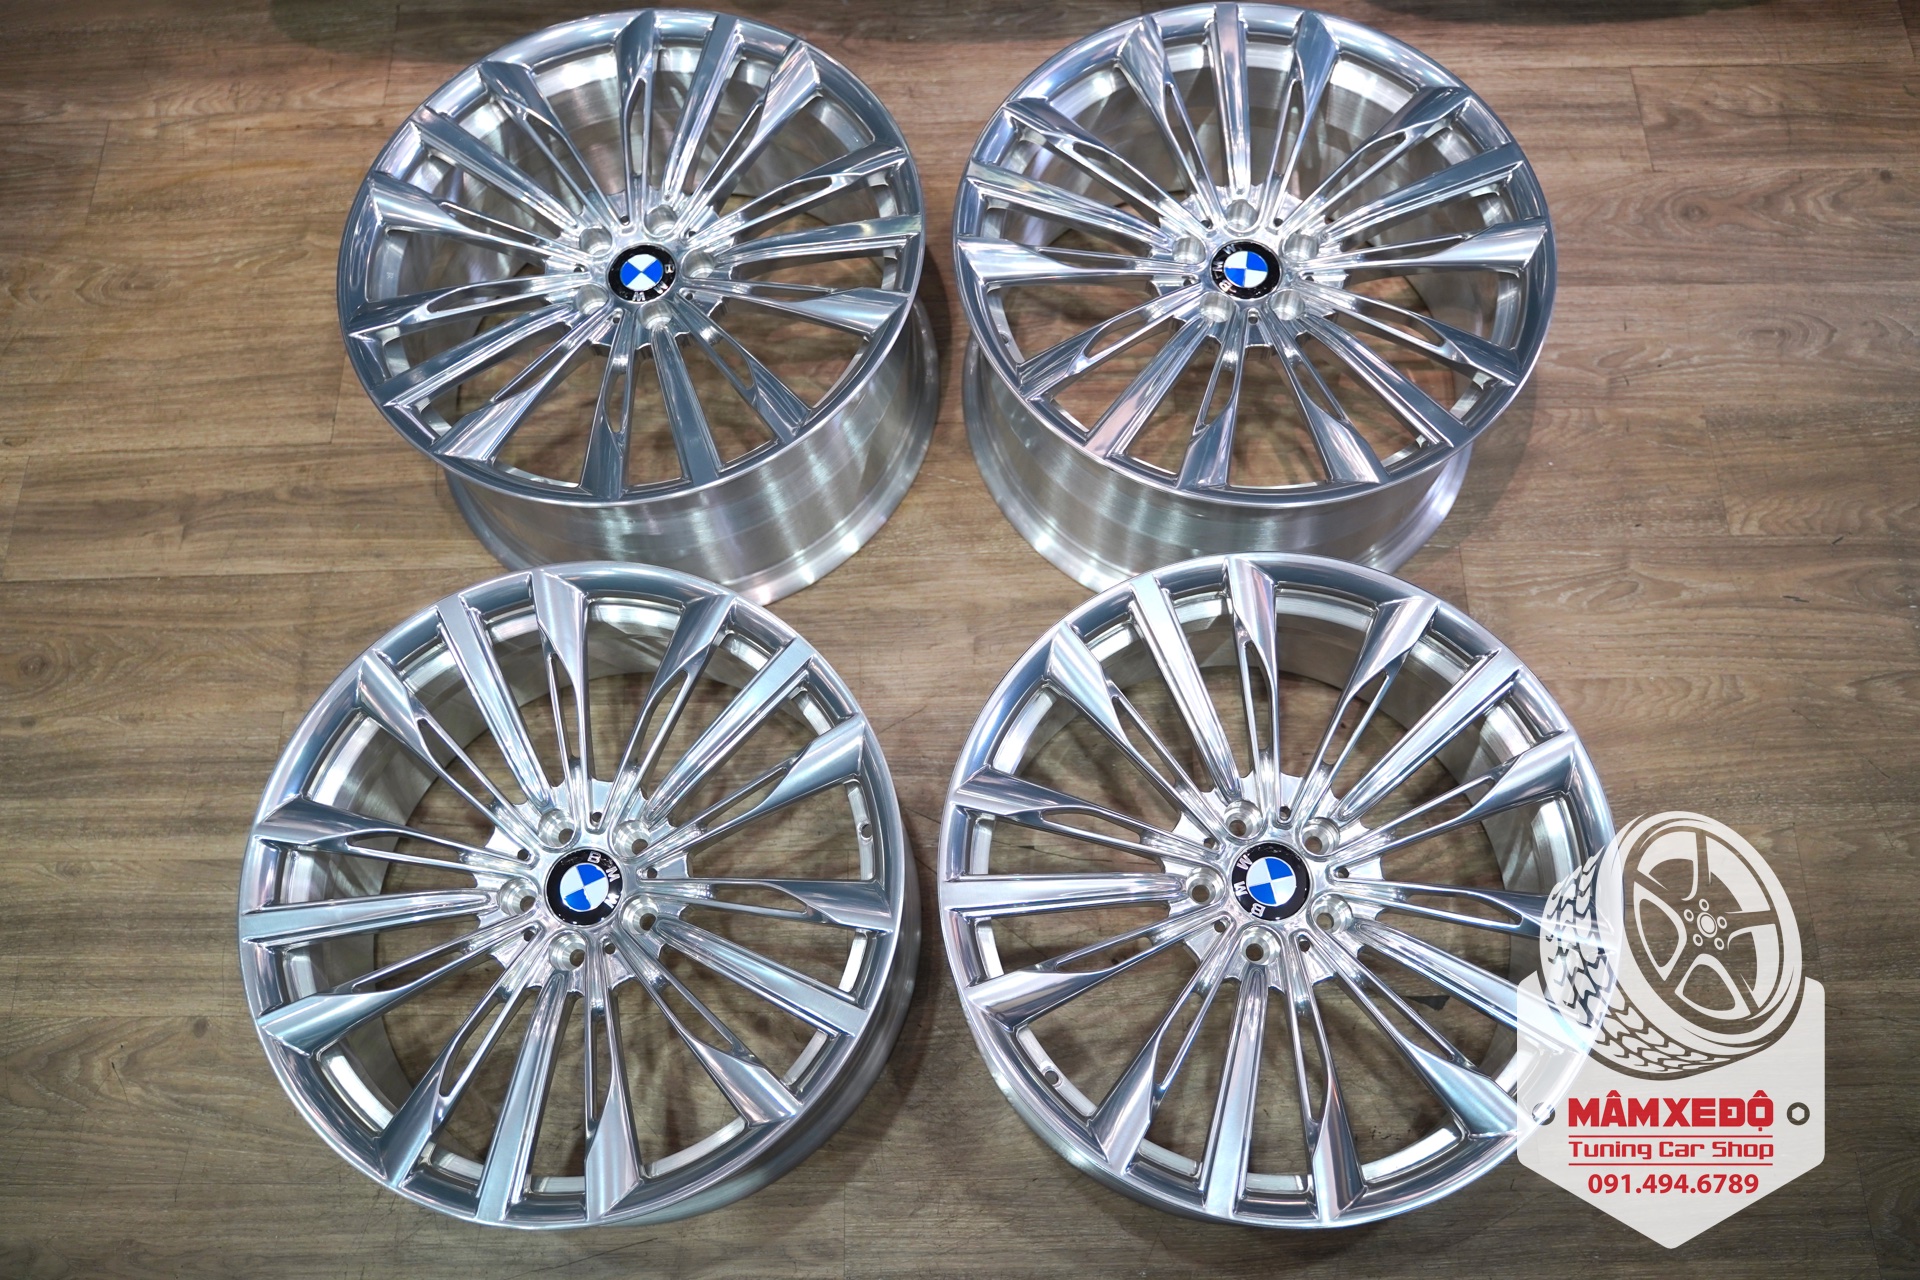 mam-xe-bmw-forged-cnc-style-646-20-inch